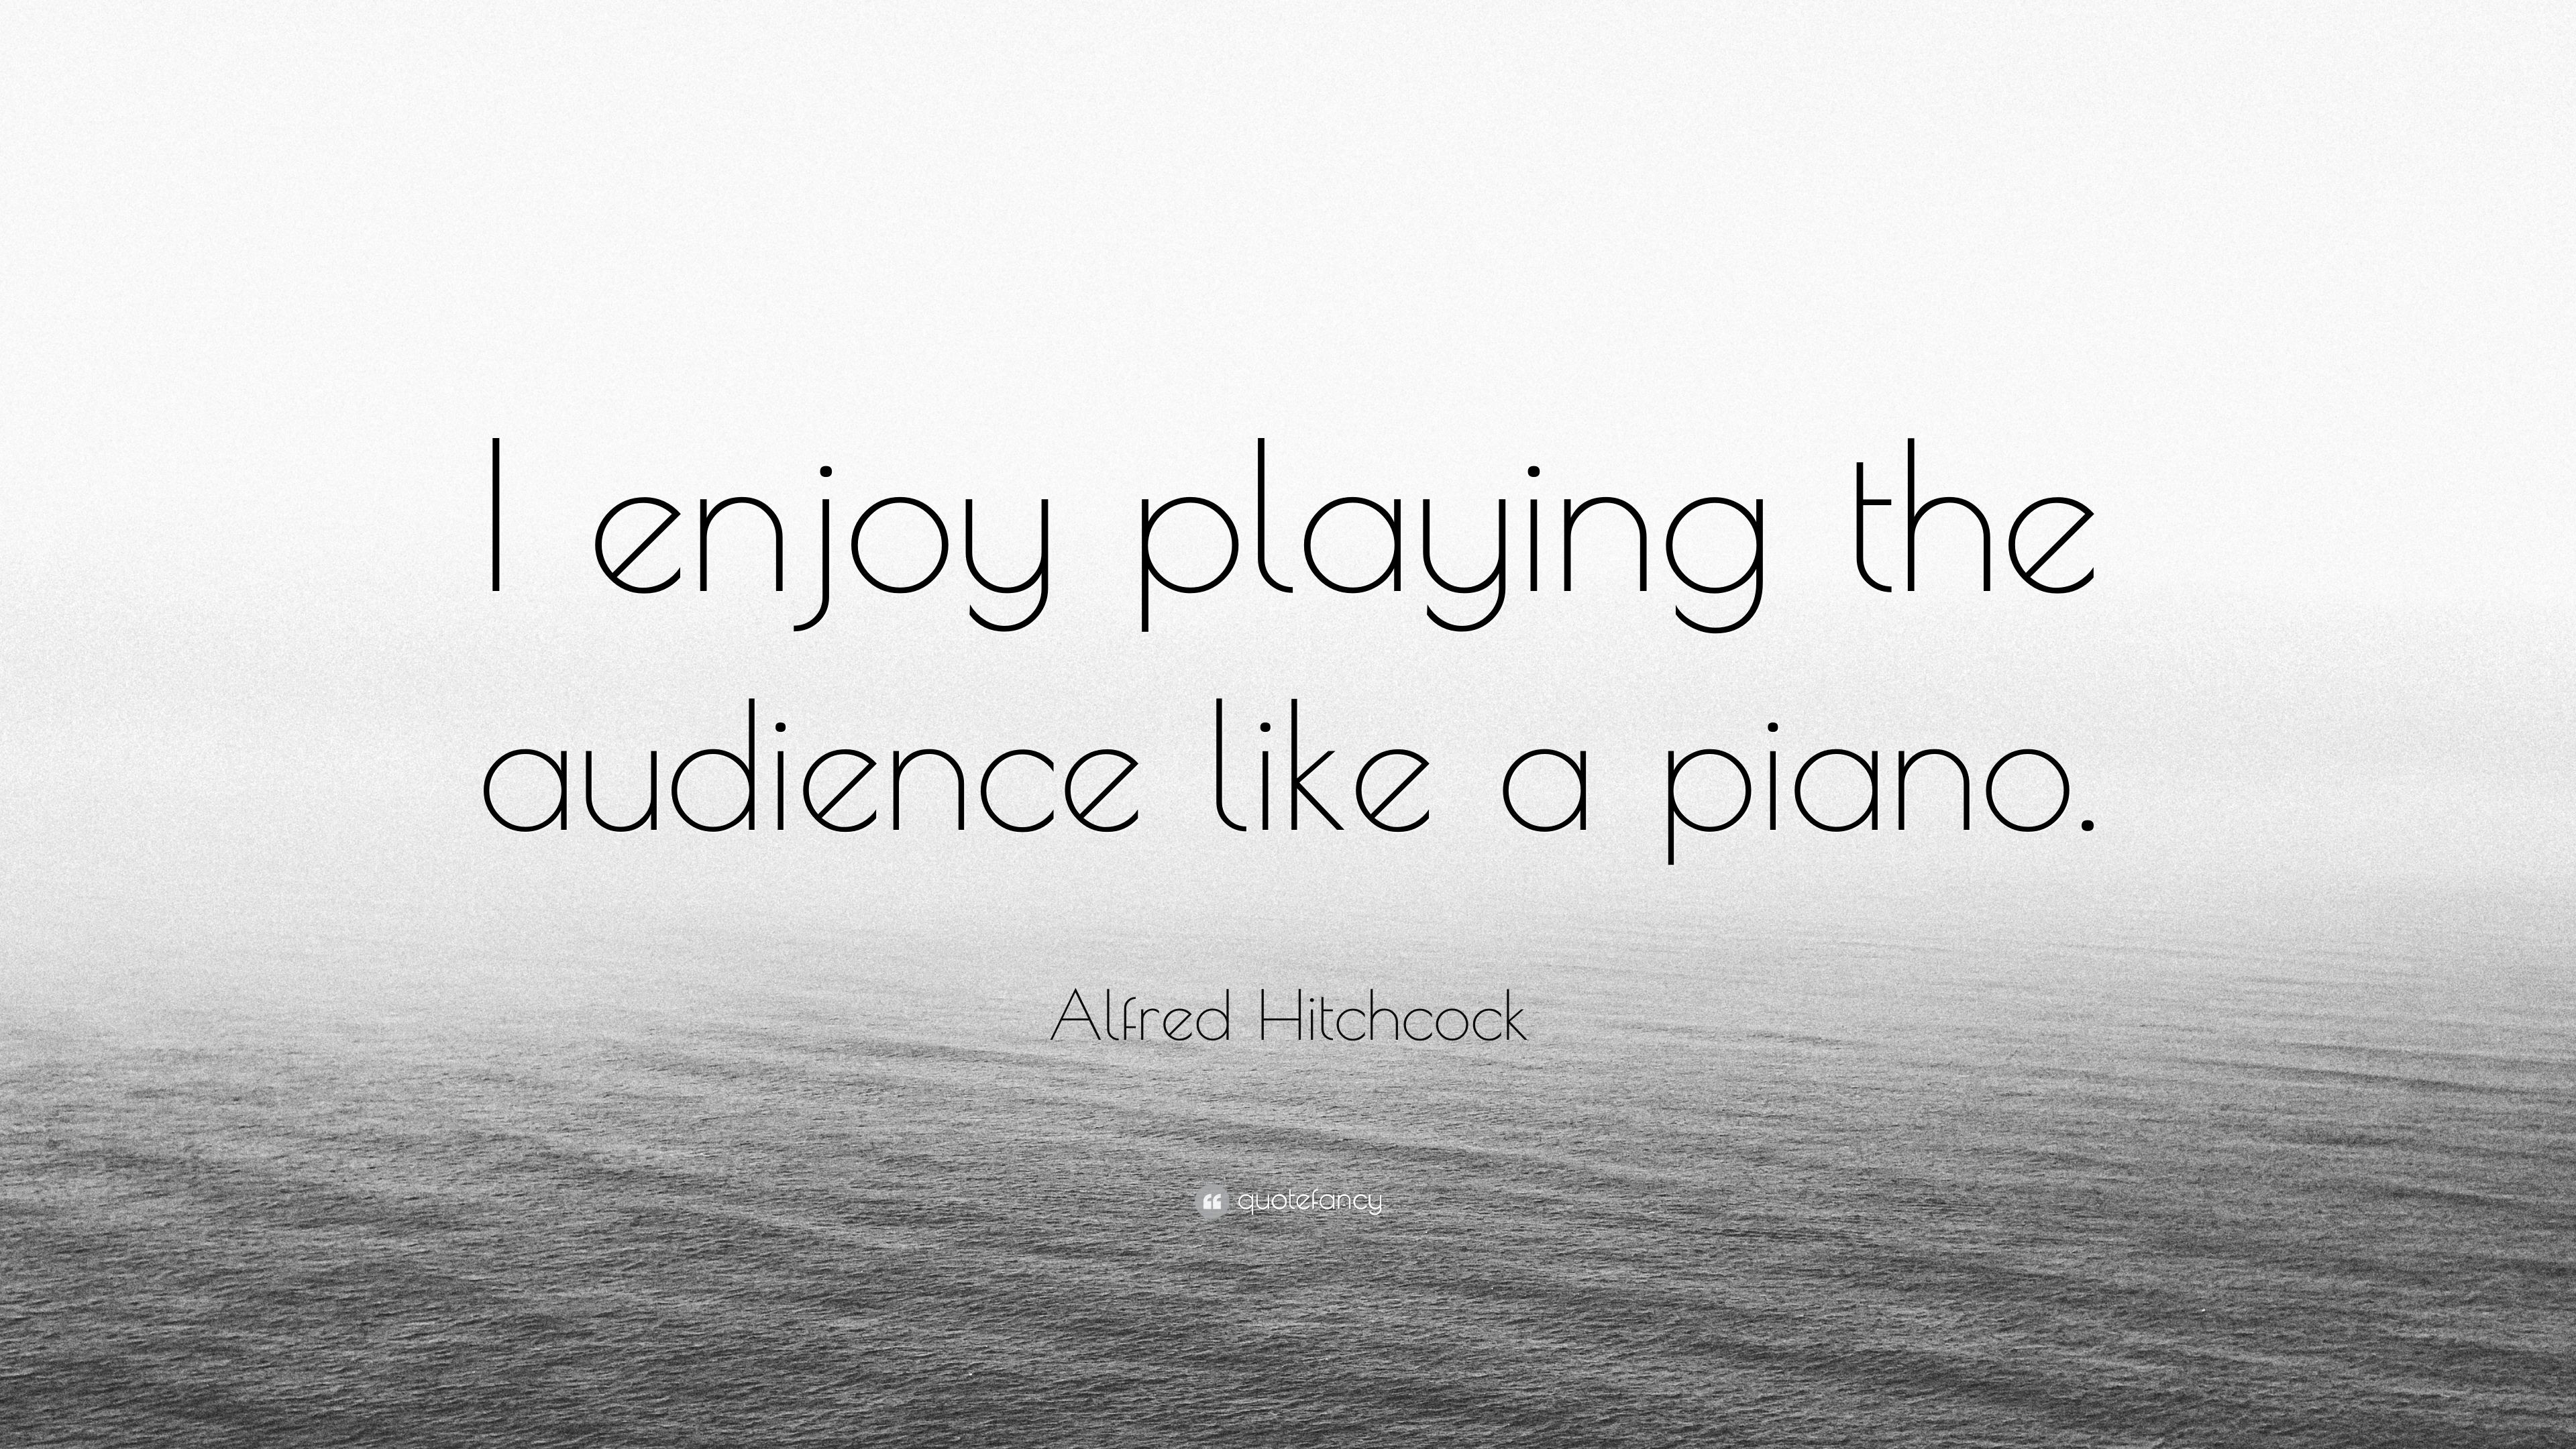 3840x2160 Alfred Hitchcock Quote: “I enjoy playing the audience like a piano.”